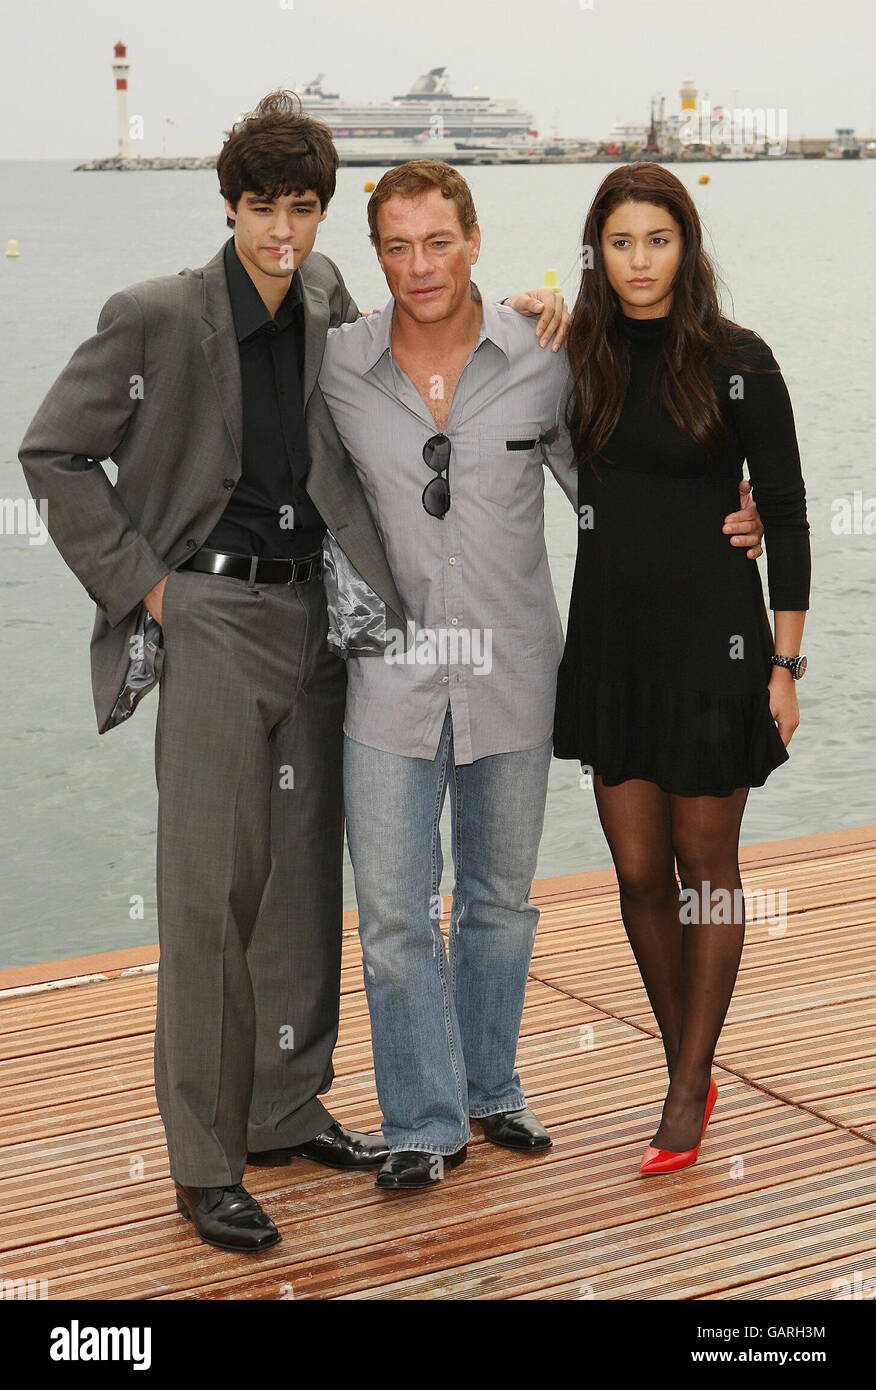 61st Cannes Film Festival - Van Damme Photocall. AP OUT Jean Claude Van Damme and family is seen at a photocall on the Majestic Pier in Cannes, France. Stock Photo